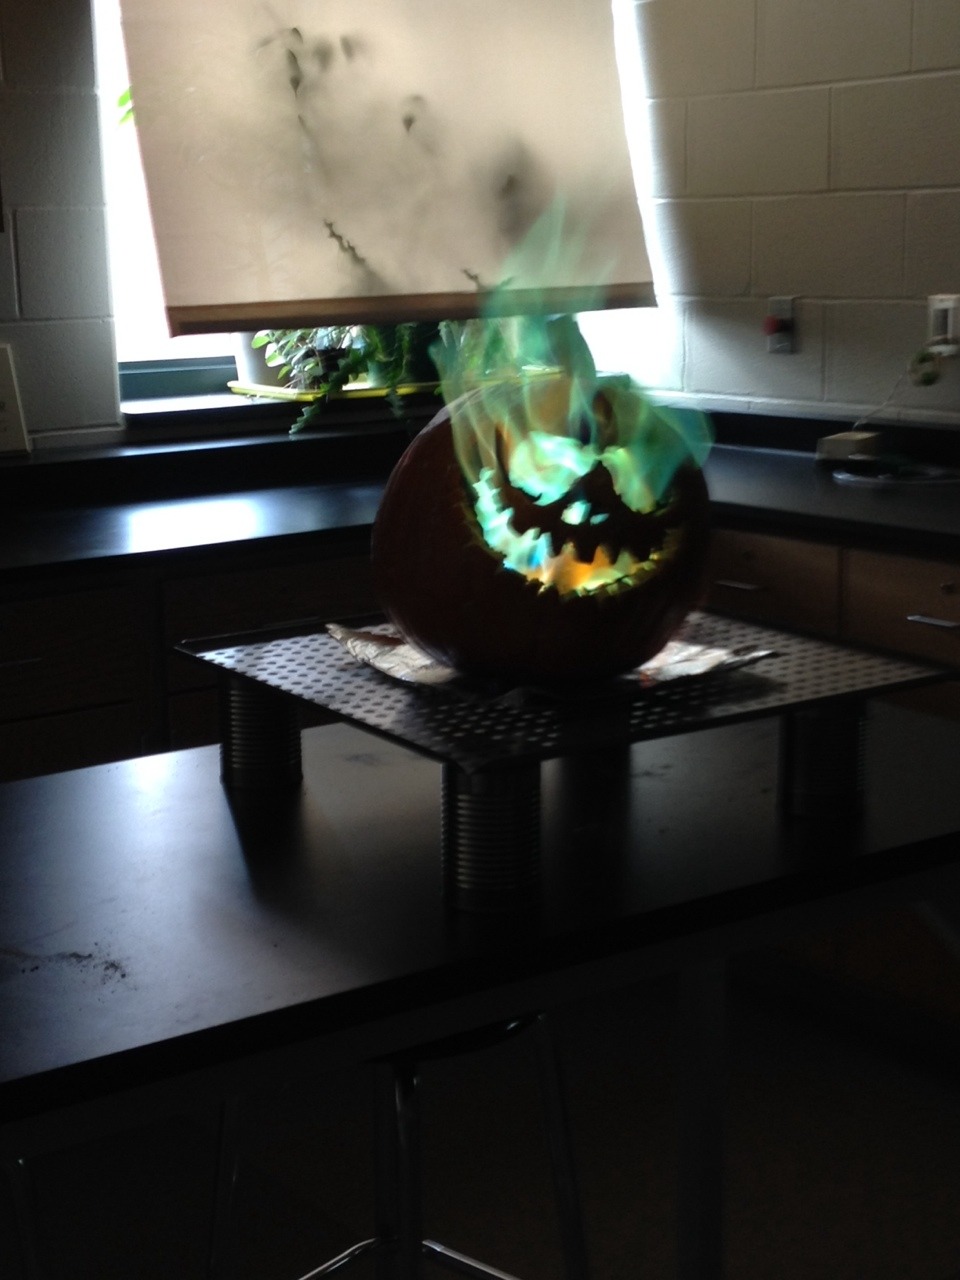 koreandrawer:Yeah so there was a pumpkin on fire in my science class today